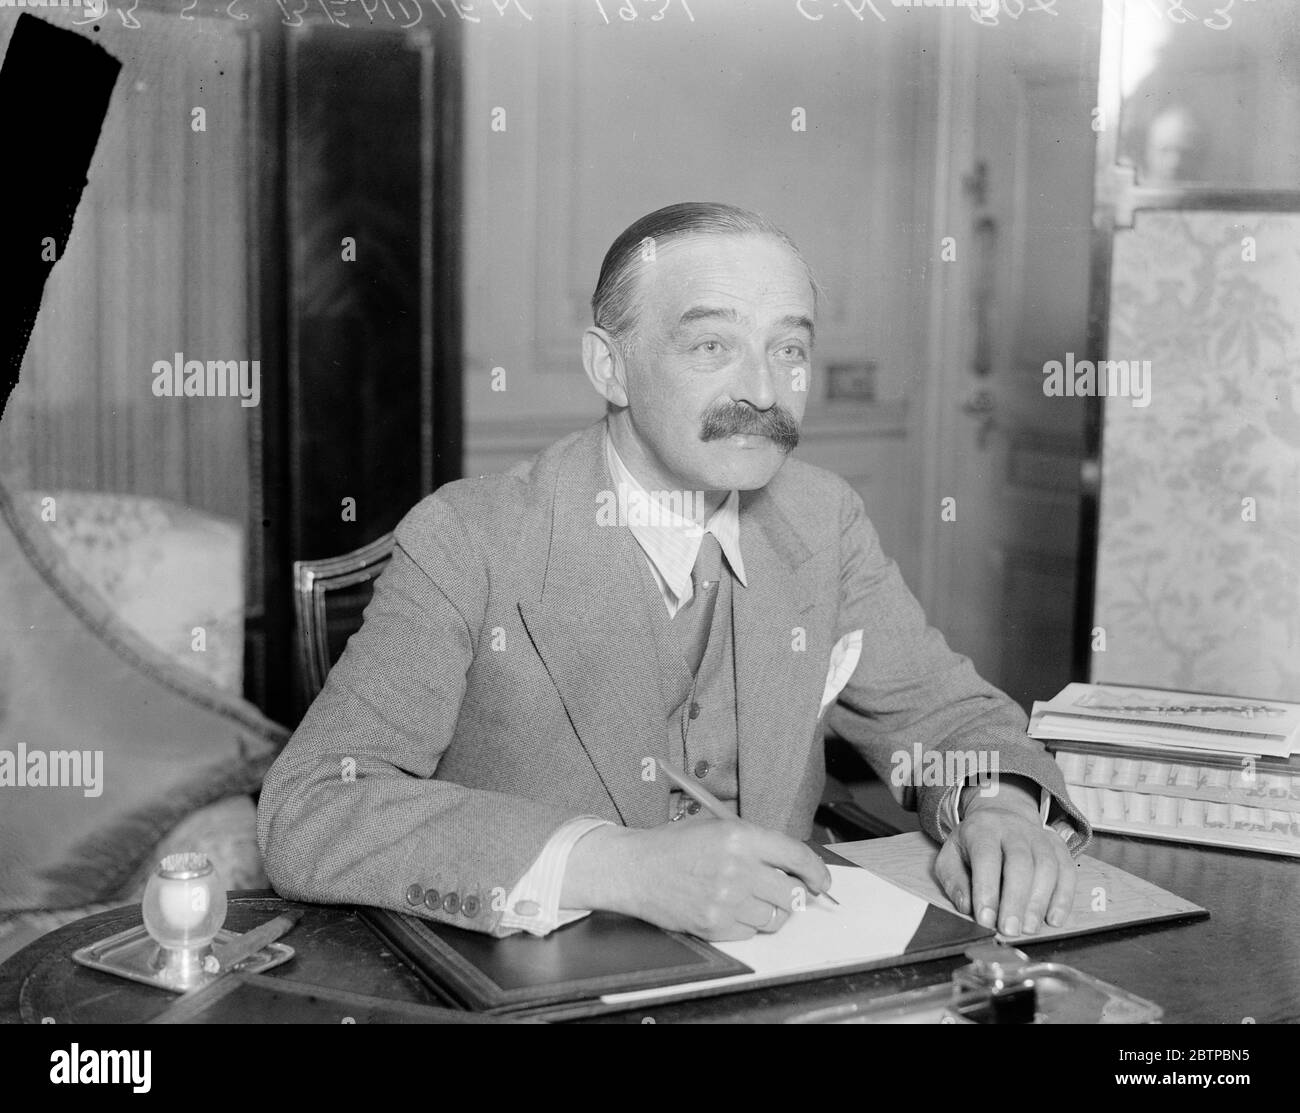 Dr Bendien in London . Dr S C Bendien , the Dutch cancer expert , who arrived in London on Friday morning . Dr Bendien photographed on Friday at his Hotel in London . 31 July 1931 Stock Photo